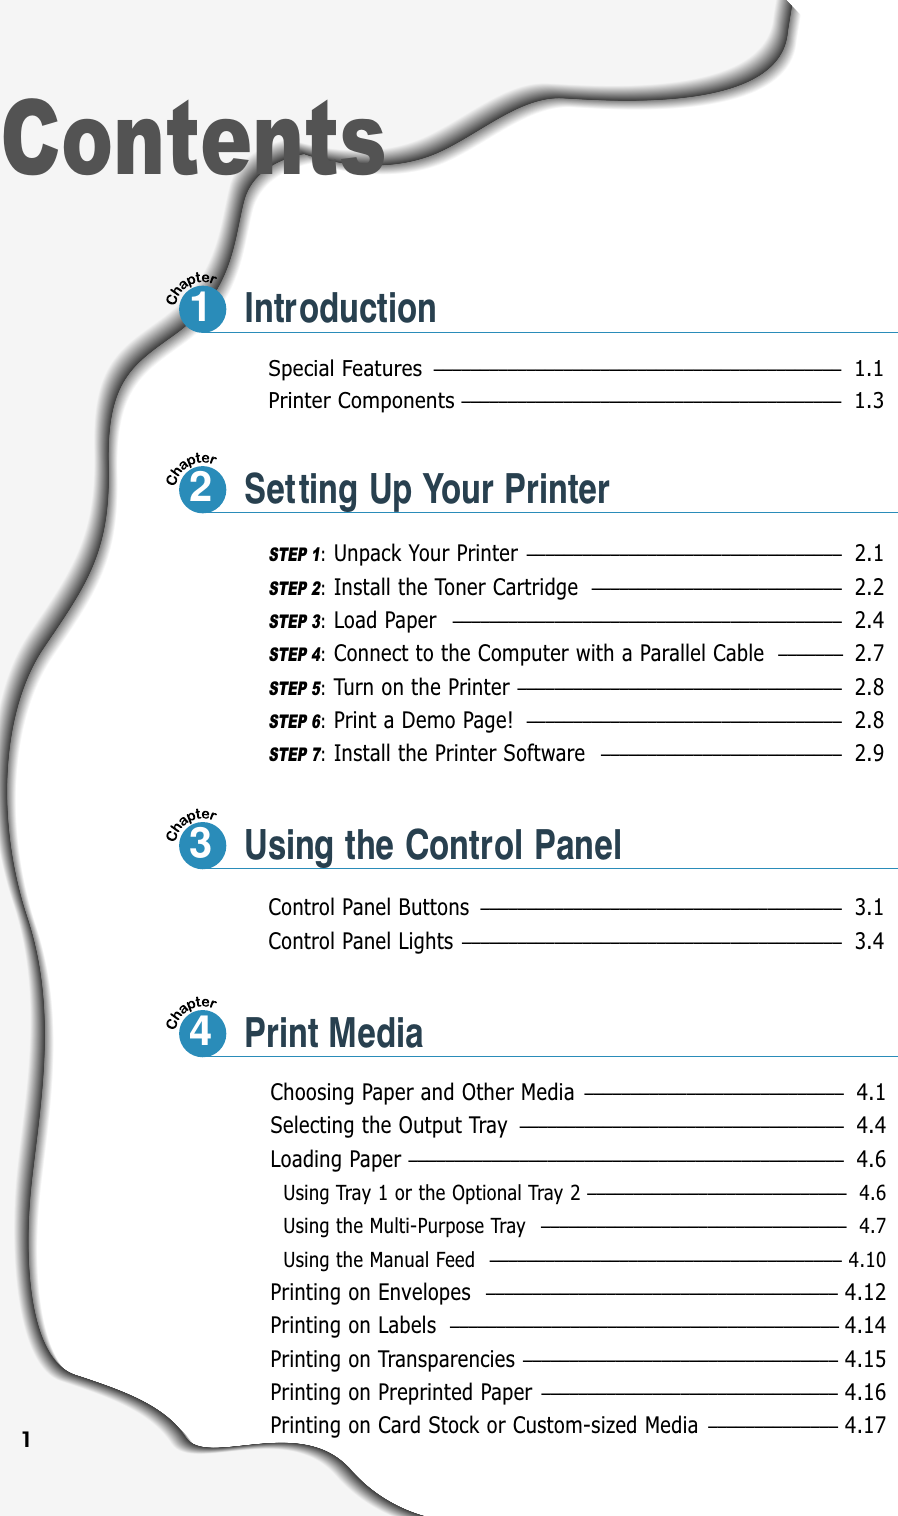 1Special Features ––––––––––––––––––––––––––––––––––––––––––––1.1Printer Components–––––––––––––––––––––––––––––––––––––––––1.3Control Panel Buttons ––––––––––––––––––––––––––––––––––––––– 3.1Control Panel Lights ––––––––––––––––––––––––––––––––––––––––– 3.4ContentsIntroductionSTEP 1:Unpack Your Printer –––––––––––––––––––––––––––––––––– 2.1STEP 2:Install the Toner Cartridge ––––––––––––––––––––––––––– 2.2STEP 3:Load Paper –––––––––––––––––––––––––––––––––––––––––– 2.4STEP 4:Connect to the Computer with a Parallel Cable  ––––––– 2.7STEP 5:Turn on the Printer ––––––––––––––––––––––––––––––––––– 2.8STEP 6:Print a Demo Page! –––––––––––––––––––––––––––––––––– 2.8STEP 7:Install the Printer Software –––––––––––––––––––––––––– 2.9Choosing Paper and Other Media –––––––––––––––––––––––––––– 4.1Selecting the Output Tray ––––––––––––––––––––––––––––––––––– 4.4Loading Paper ––––––––––––––––––––––––––––––––––––––––––––––– 4.6Using Tray 1 or the Optional Tray 2 –––––––––––––––––––––––––––– 4.6Using the Multi-Purpose Tray  ––––––––––––––––––––––––––––––––– 4.7Using the Manual Feed  –––––––––––––––––––––––––––––––––––––– 4.10Printing on Envelopes –––––––––––––––––––––––––––––––––––––– 4.12Printing on Labels –––––––––––––––––––––––––––––––––––––––––– 4.14Printing on Transparencies –––––––––––––––––––––––––––––––––– 4.15Printing on Preprinted Paper –––––––––––––––––––––––––––––––– 4.16Printing on Card Stock or Custom-sized Media –––––––––––––– 4.1712Setting Up Your Printer3Using the Control Panel4Print Media